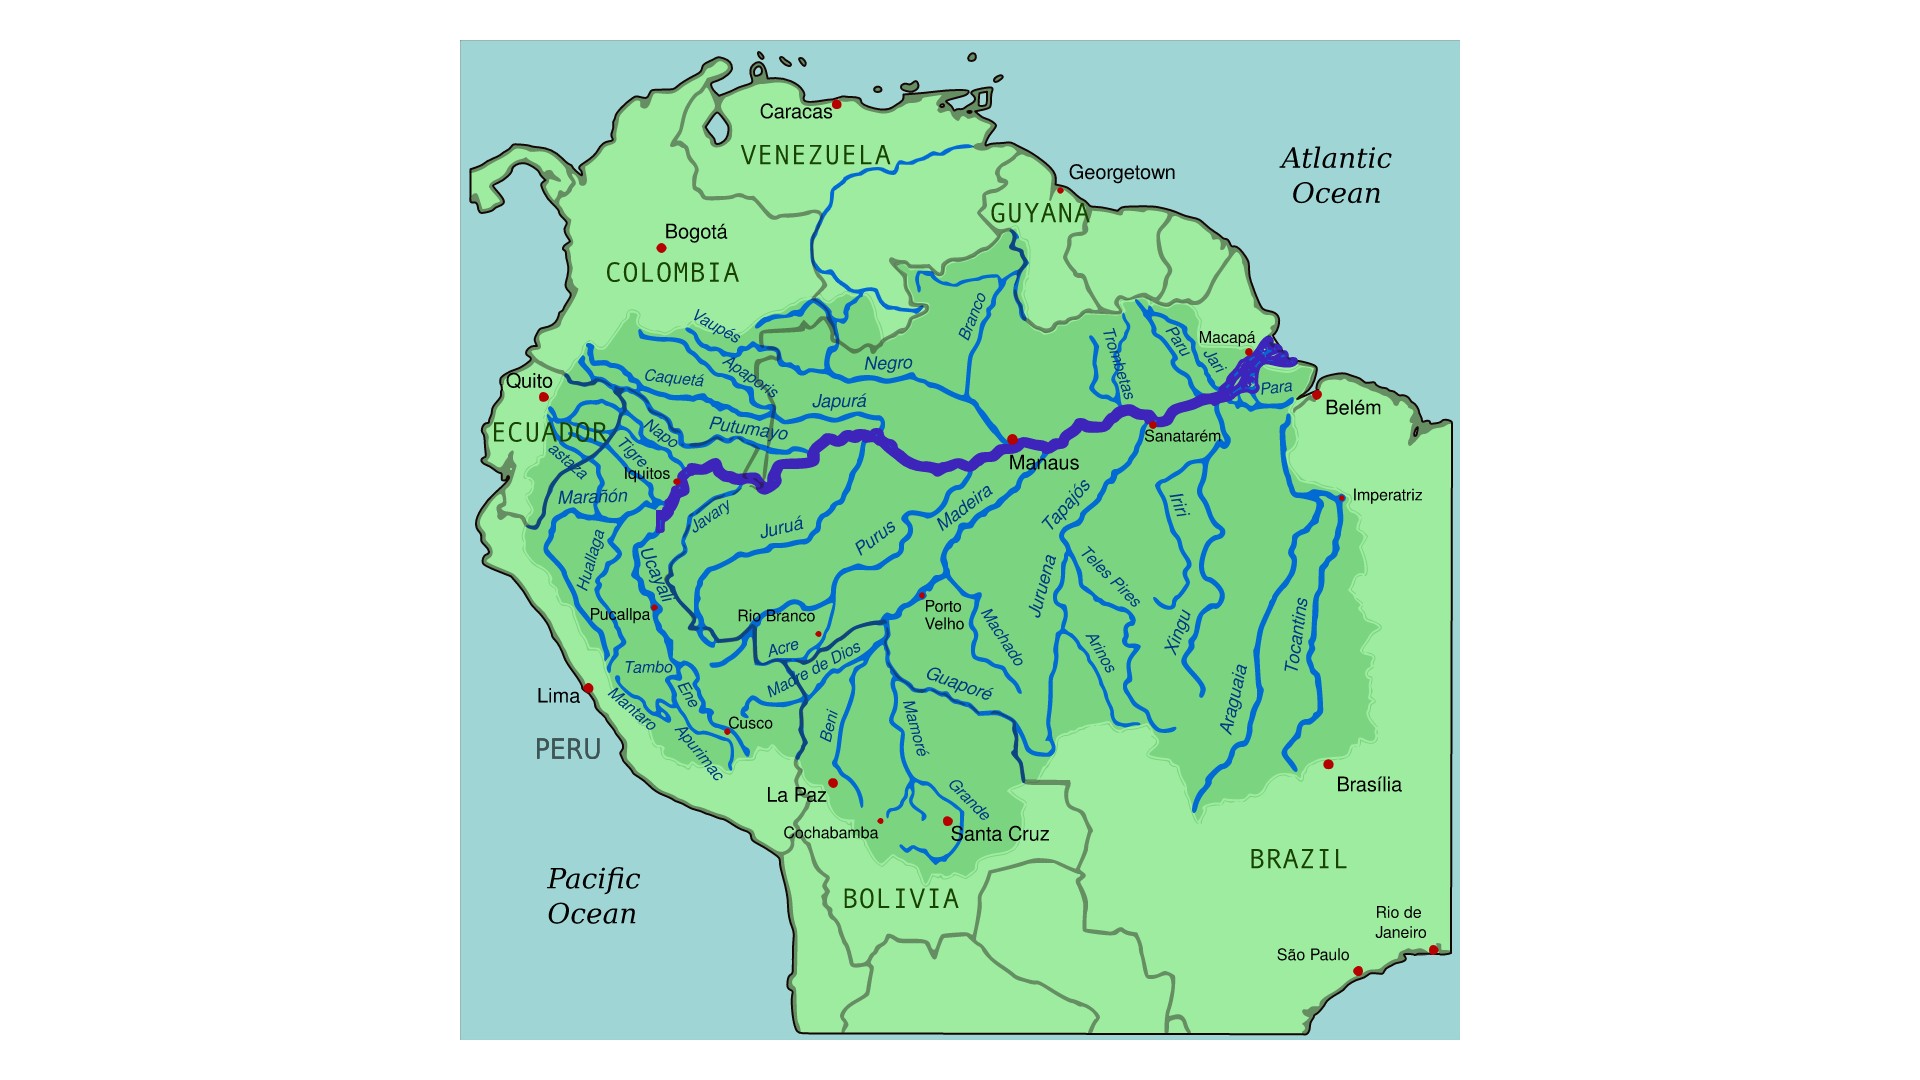 Map of the Amazon River drainage basin with the Amazon River highlighted.